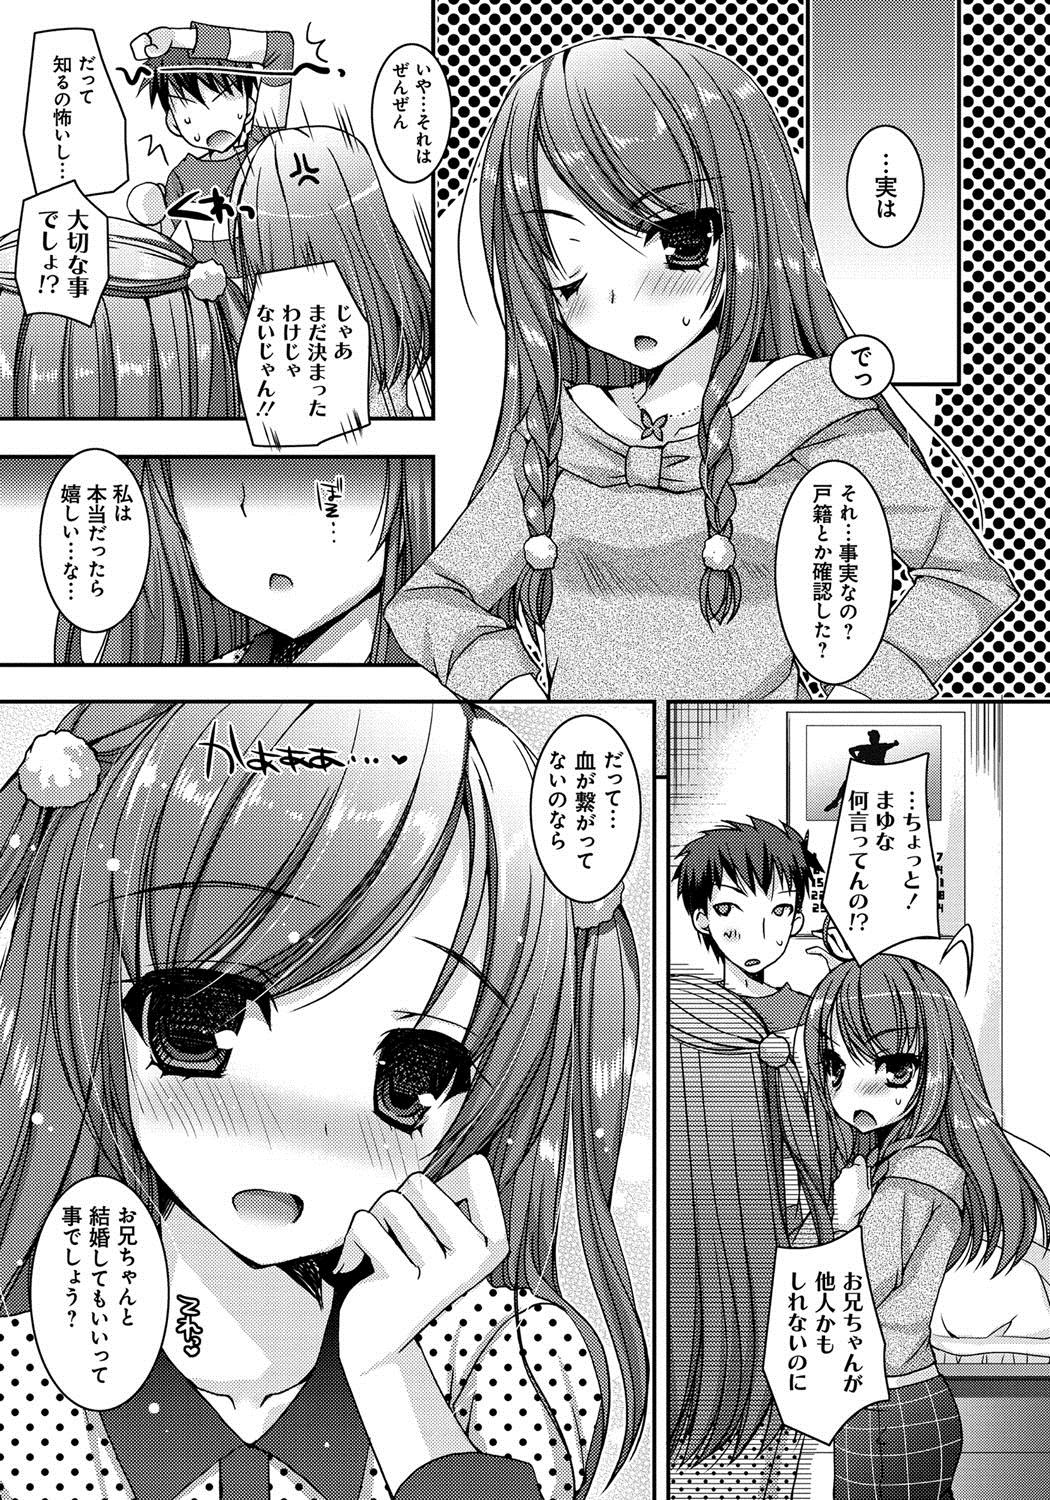 Old And Young Amai Shimai - The Sisters so Sweet Softcore - Page 6